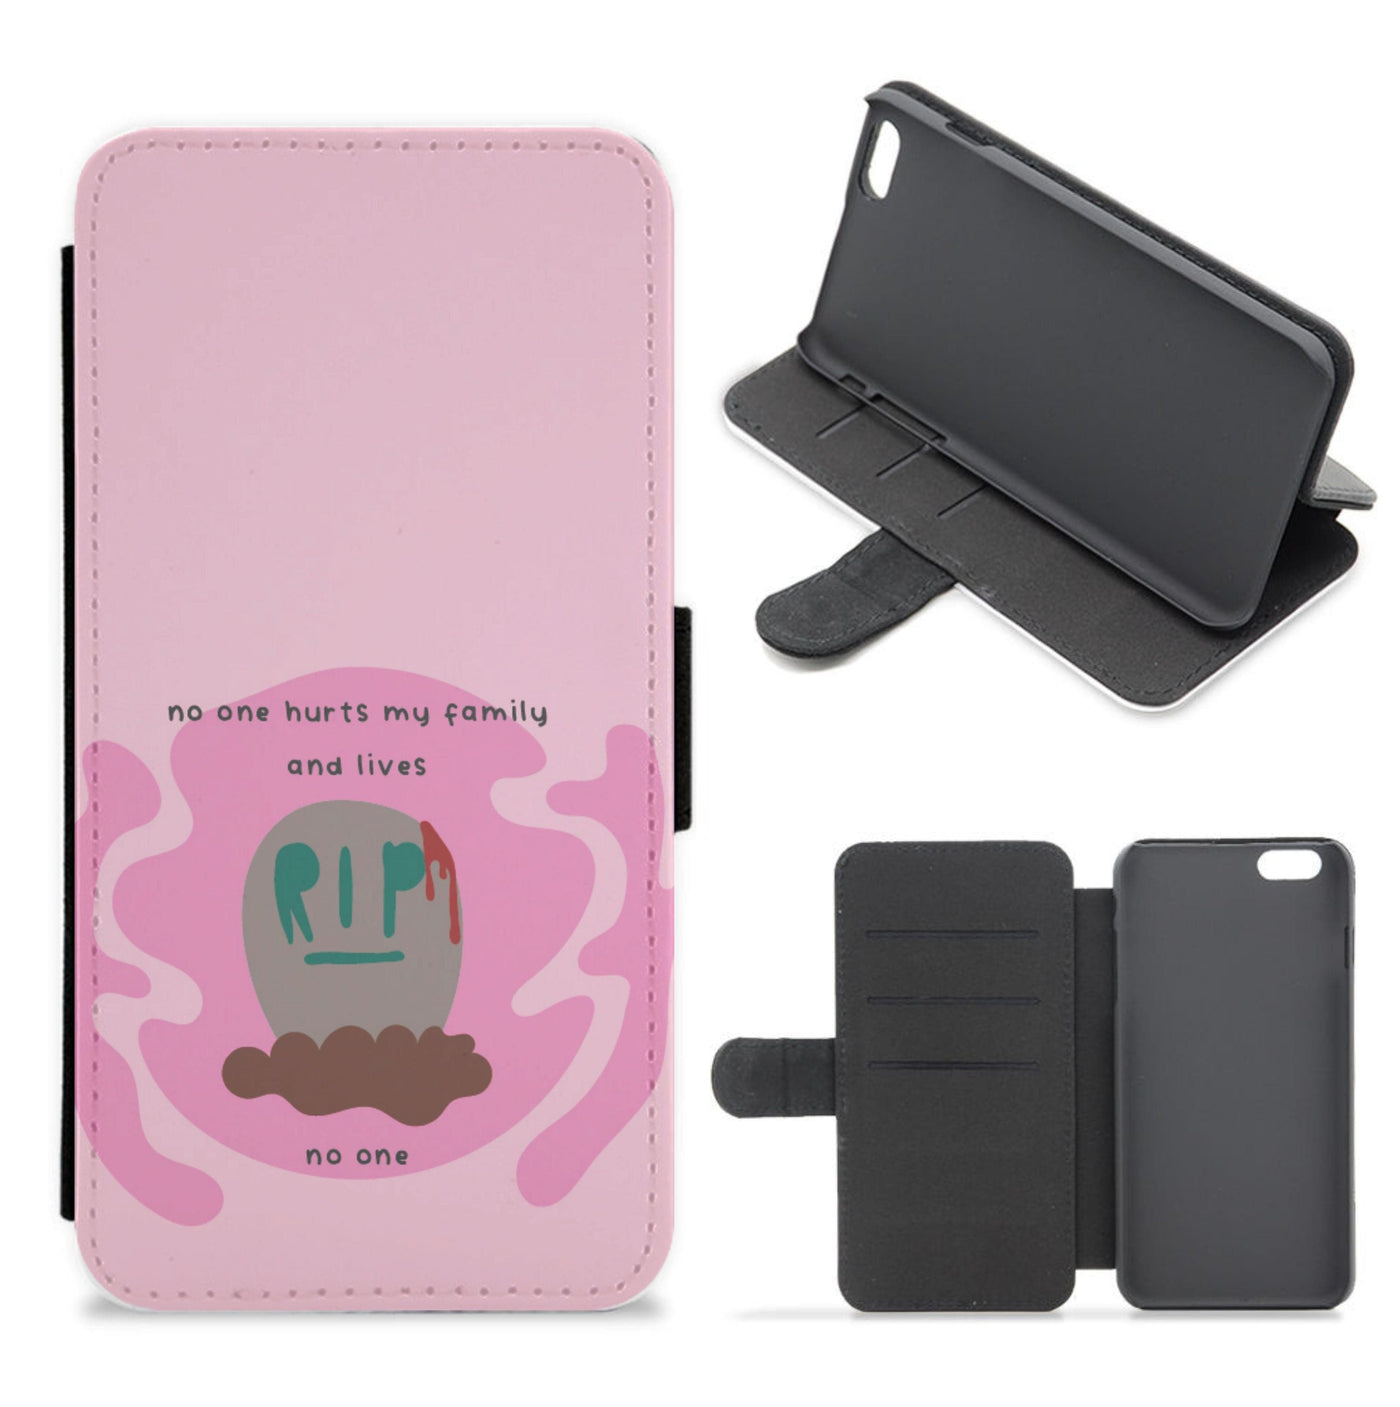 No One Hurts My Family And Lives - The Original Flip / Wallet Phone Case